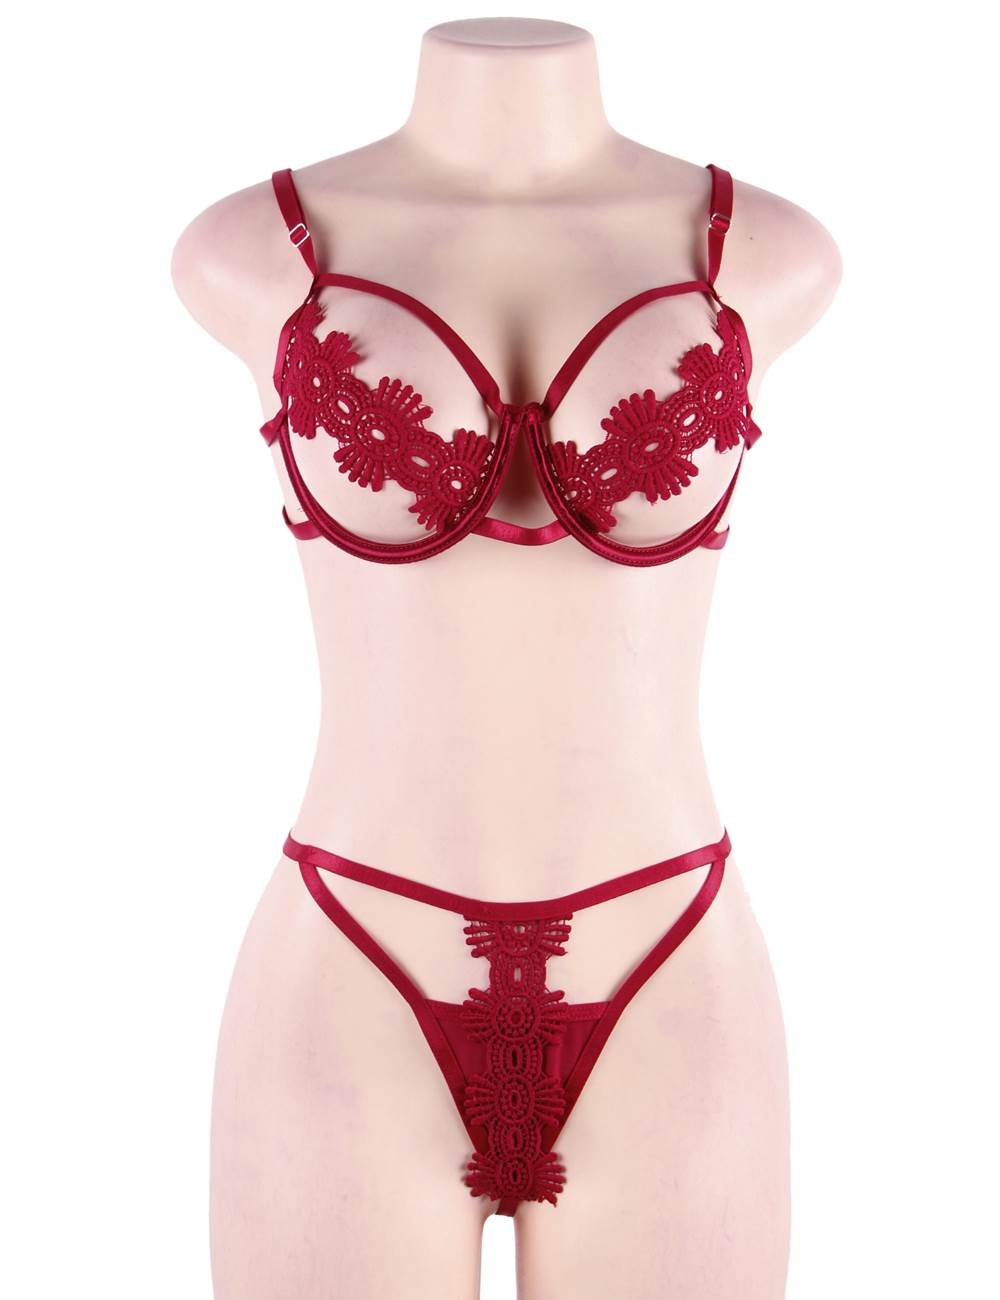 ChloéGinger - Red Delicate Flowers Lace Hollow Out Bra Set